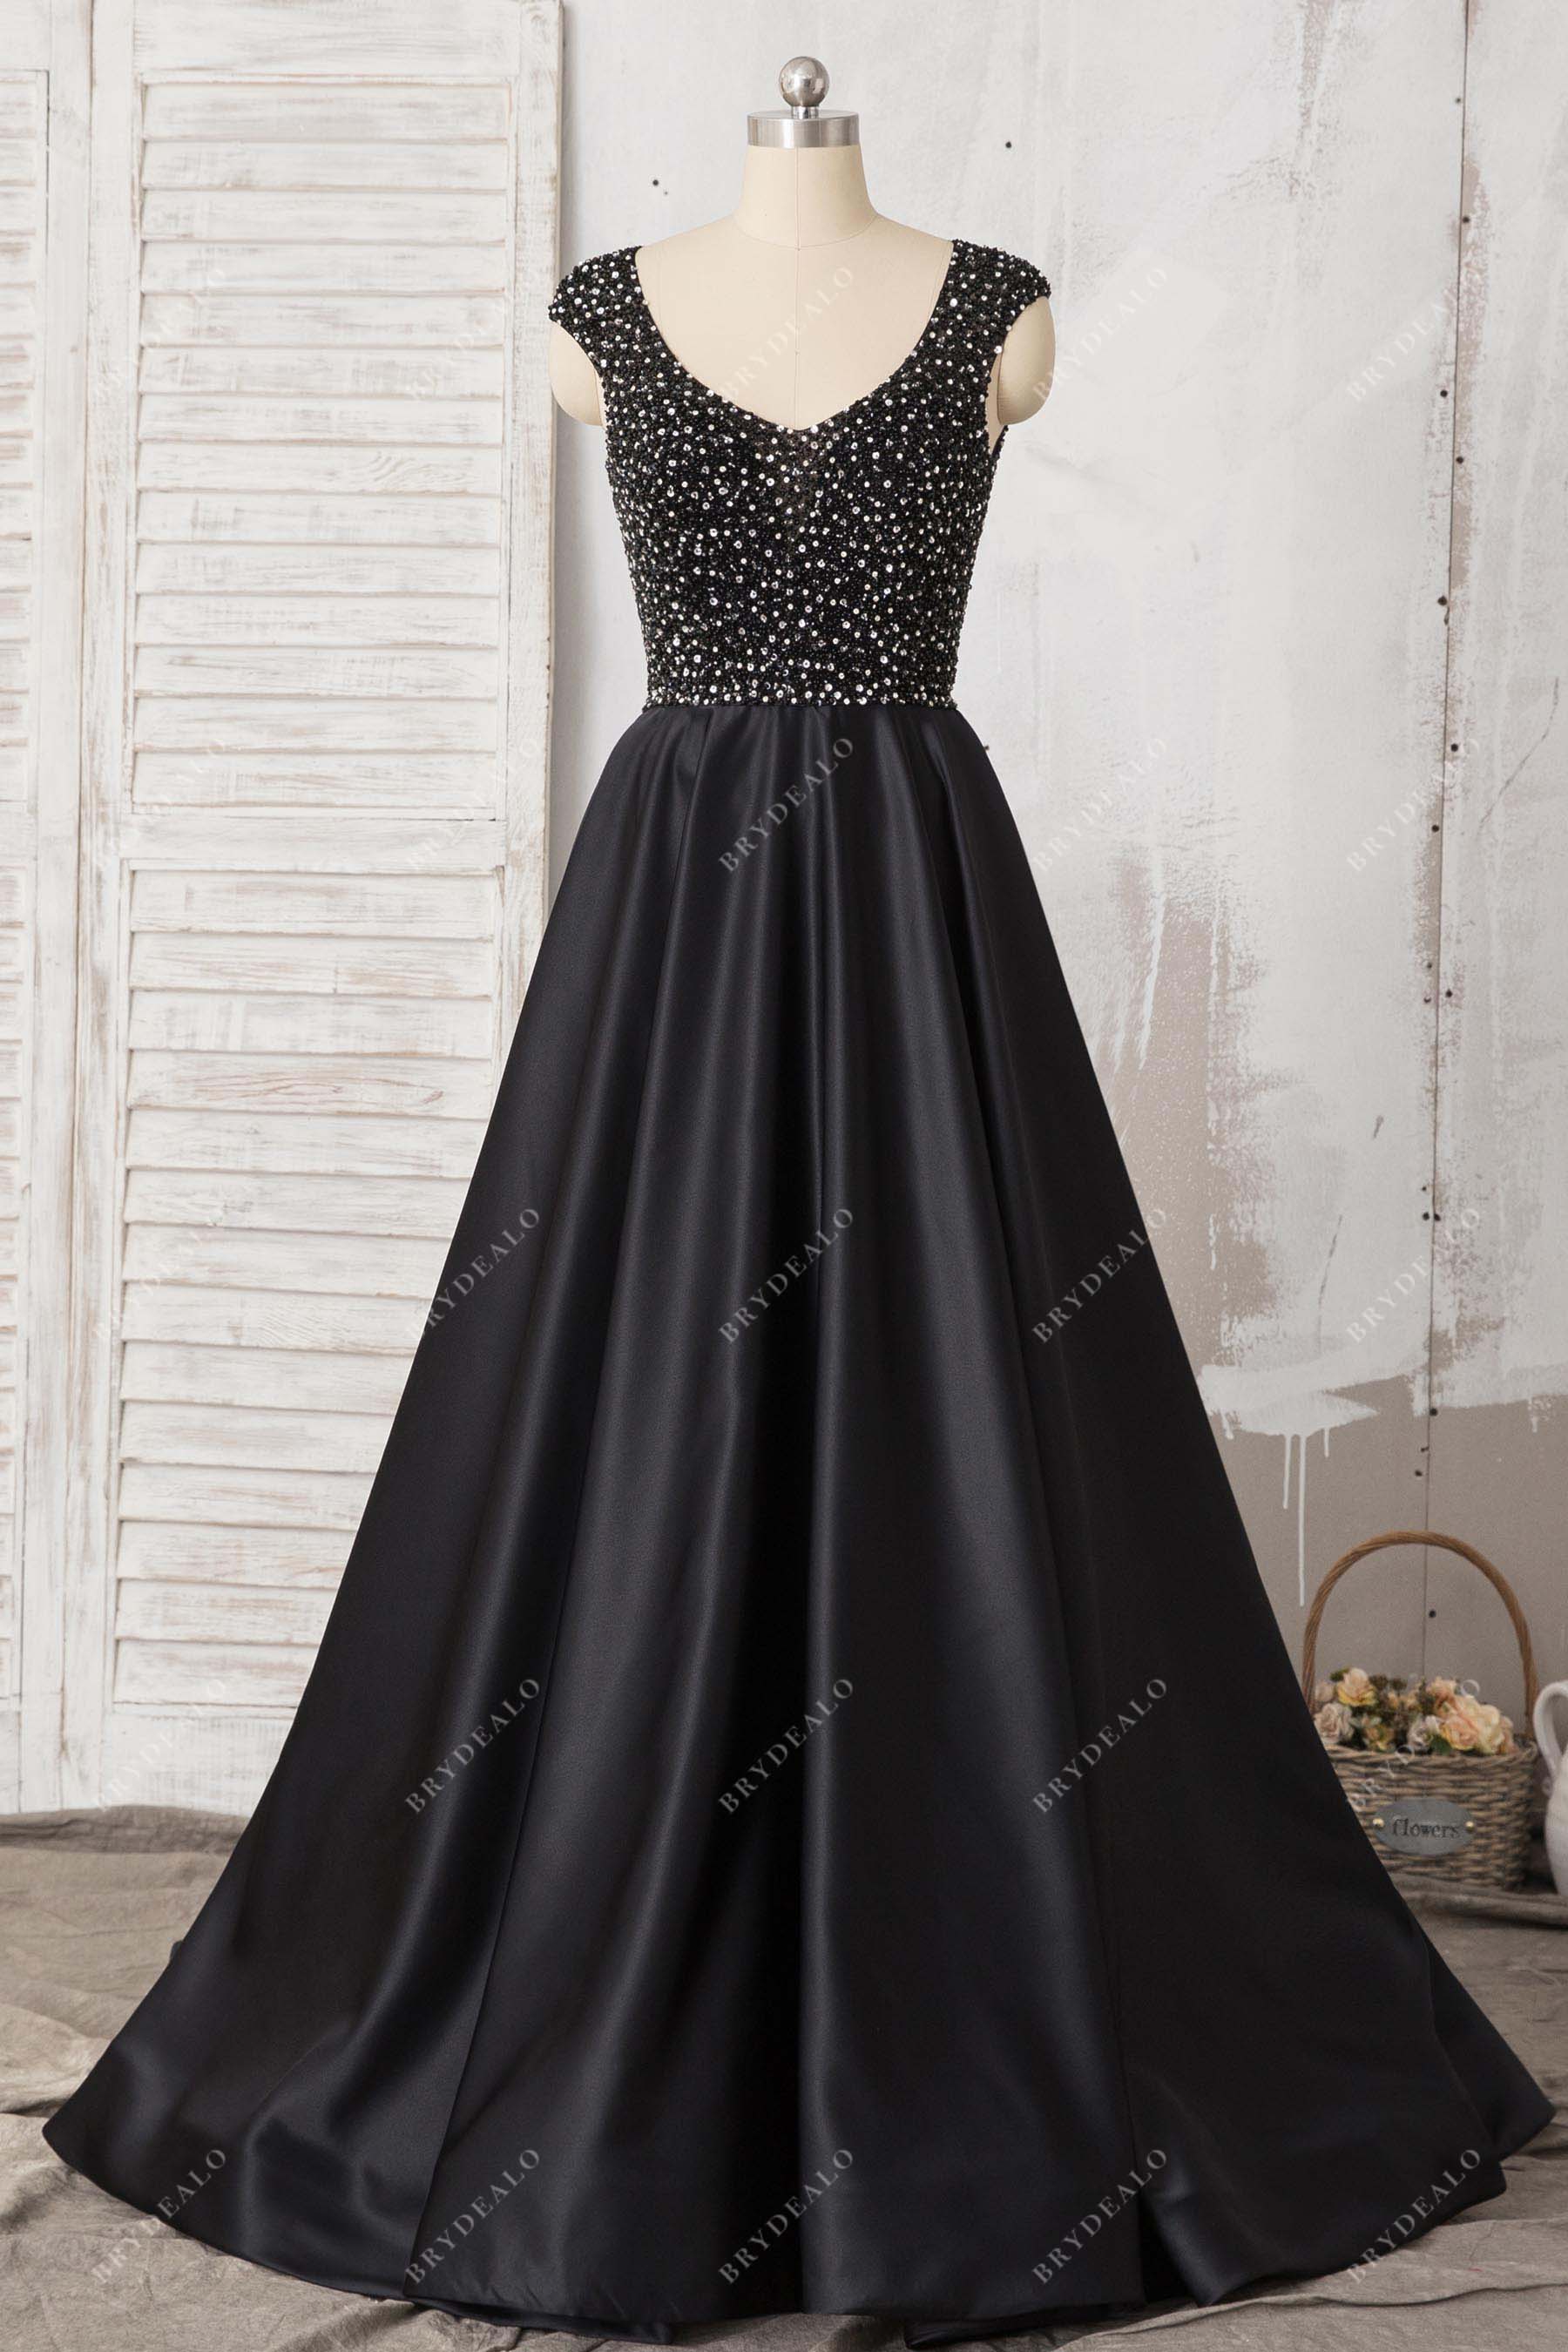 cap sleeves black stain A-line prom dress